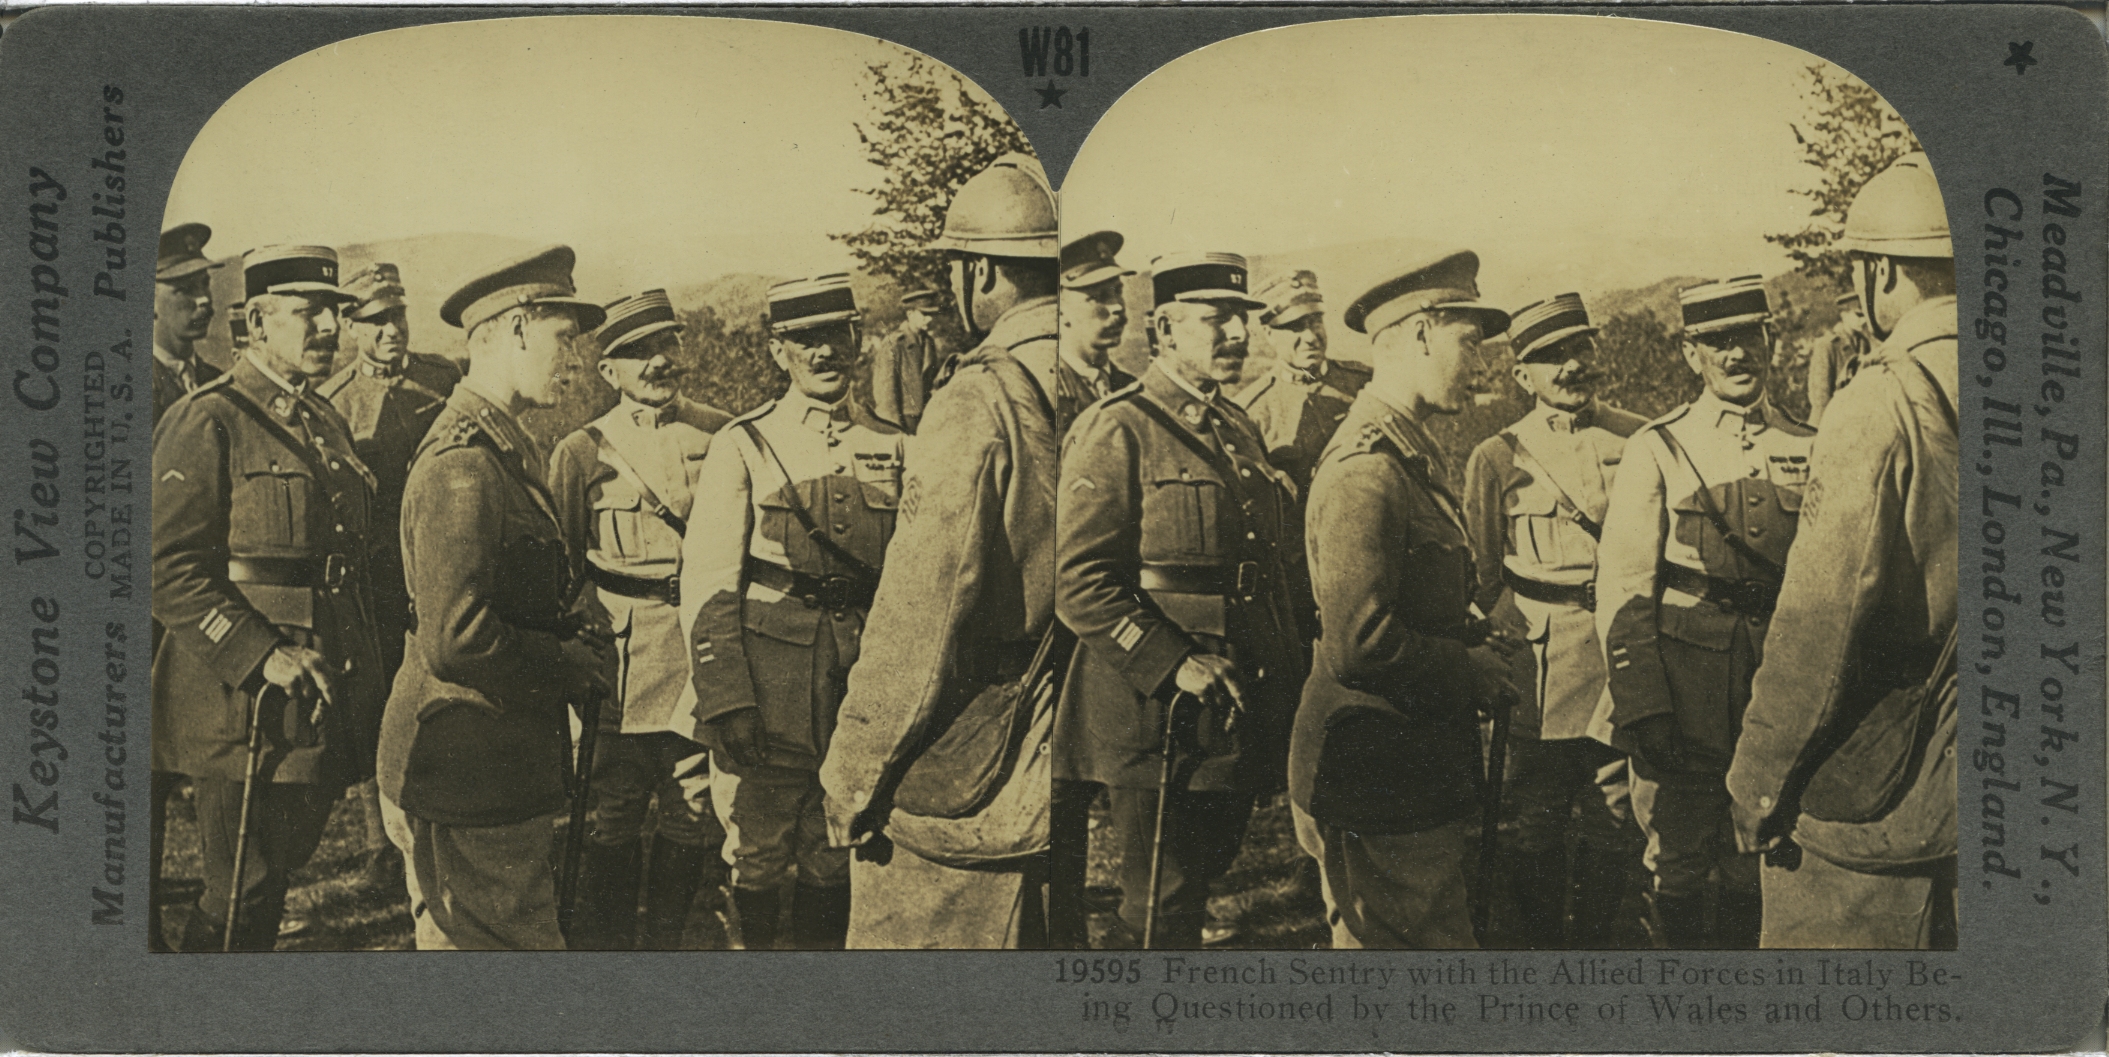 French Sentry with the Allied Forces in Italy Being Questioned by the Prince of Wales and Others